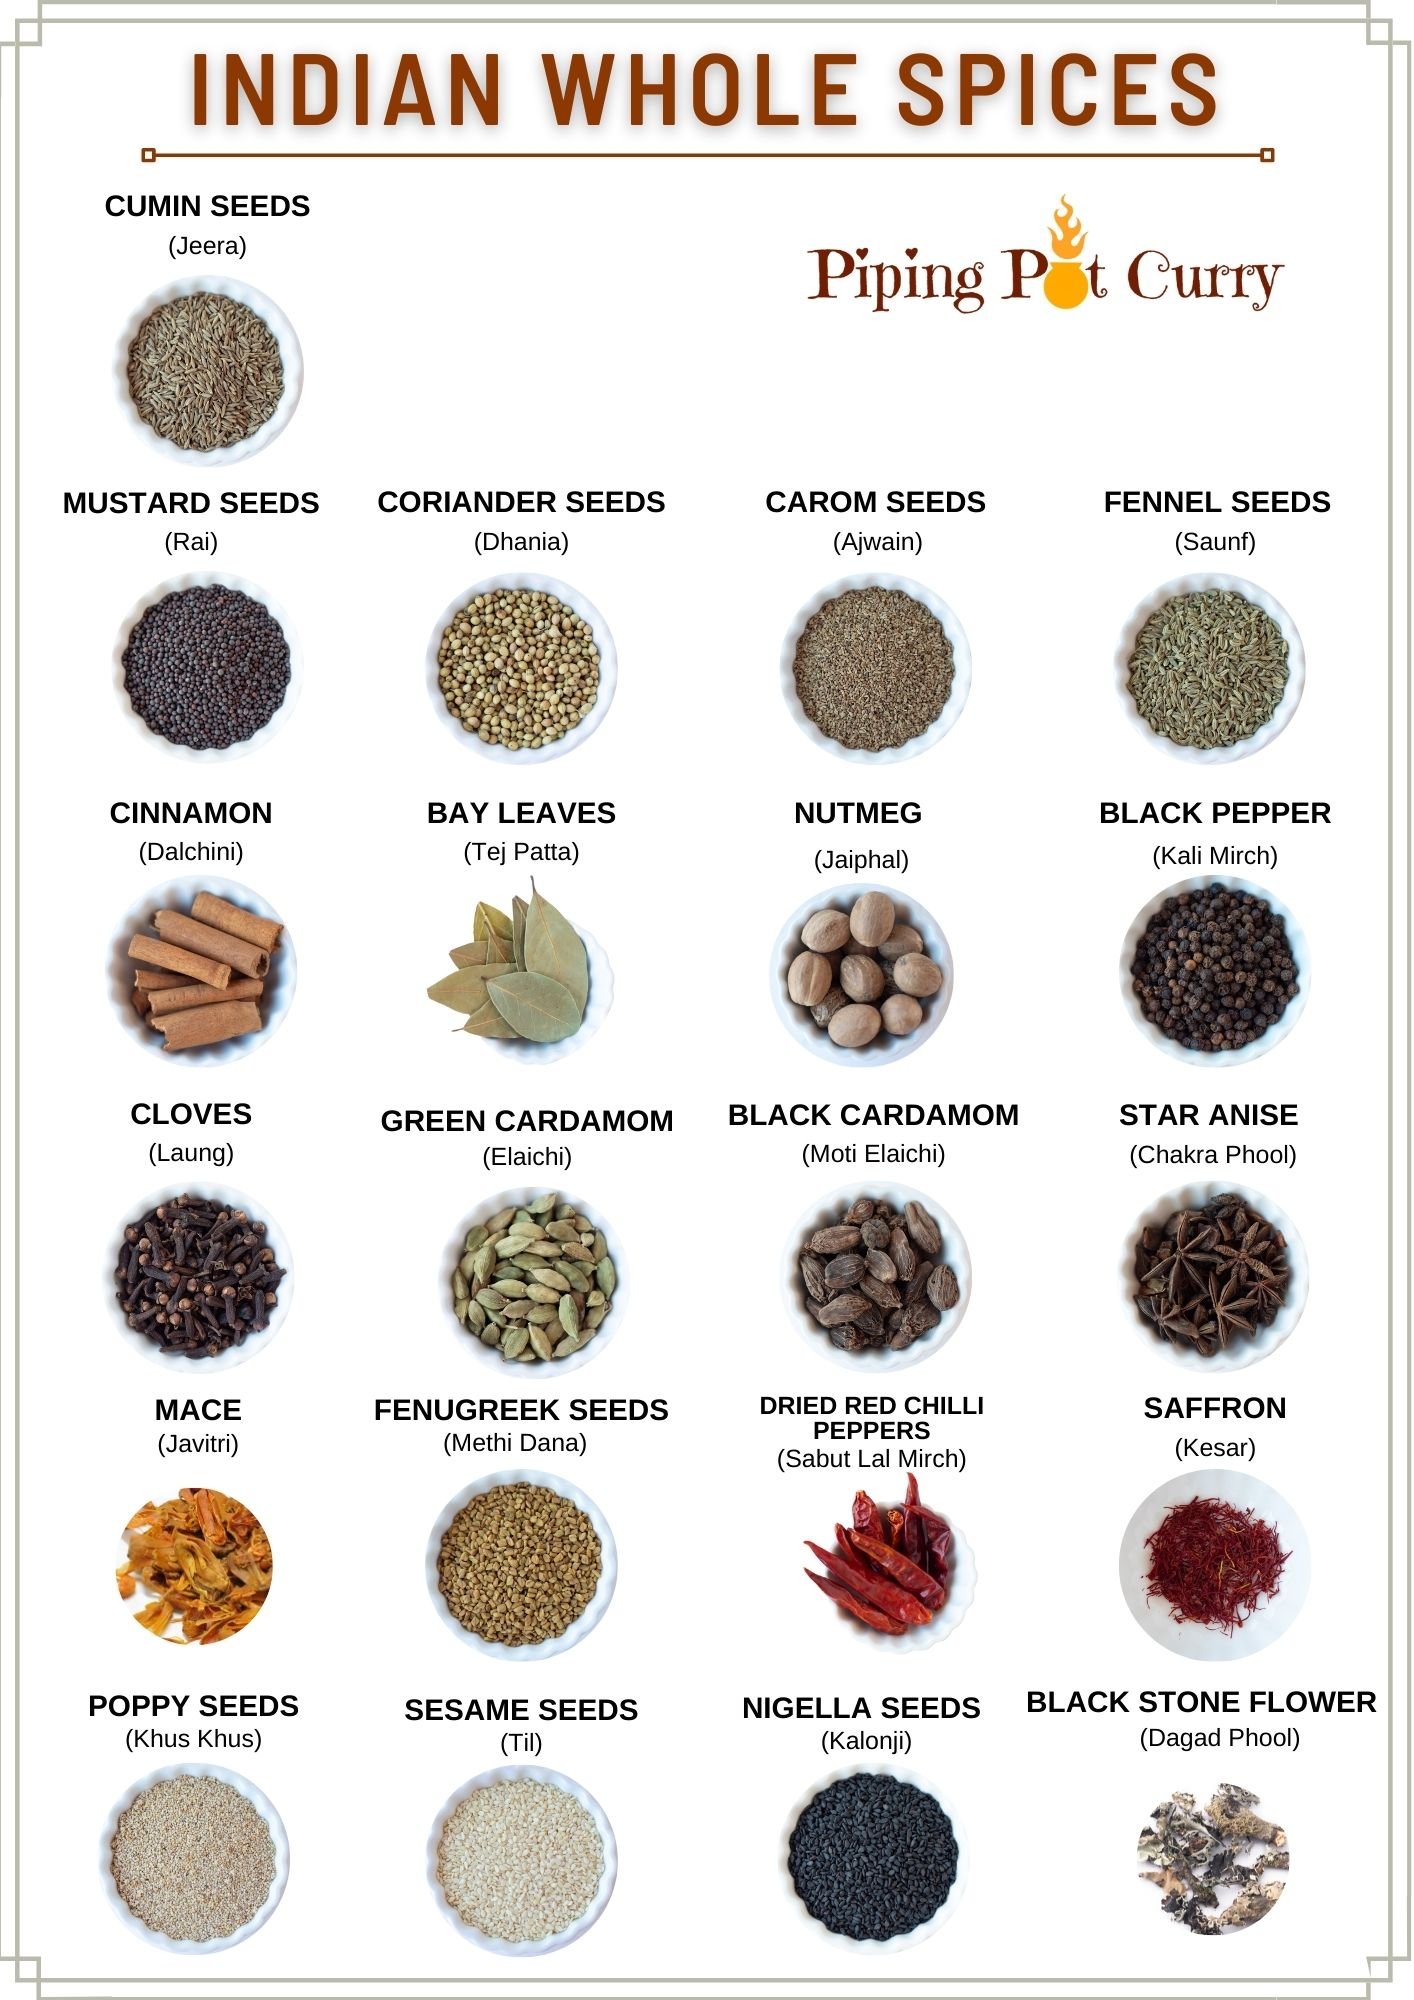 Images of Indian whole spices with English and hindi names